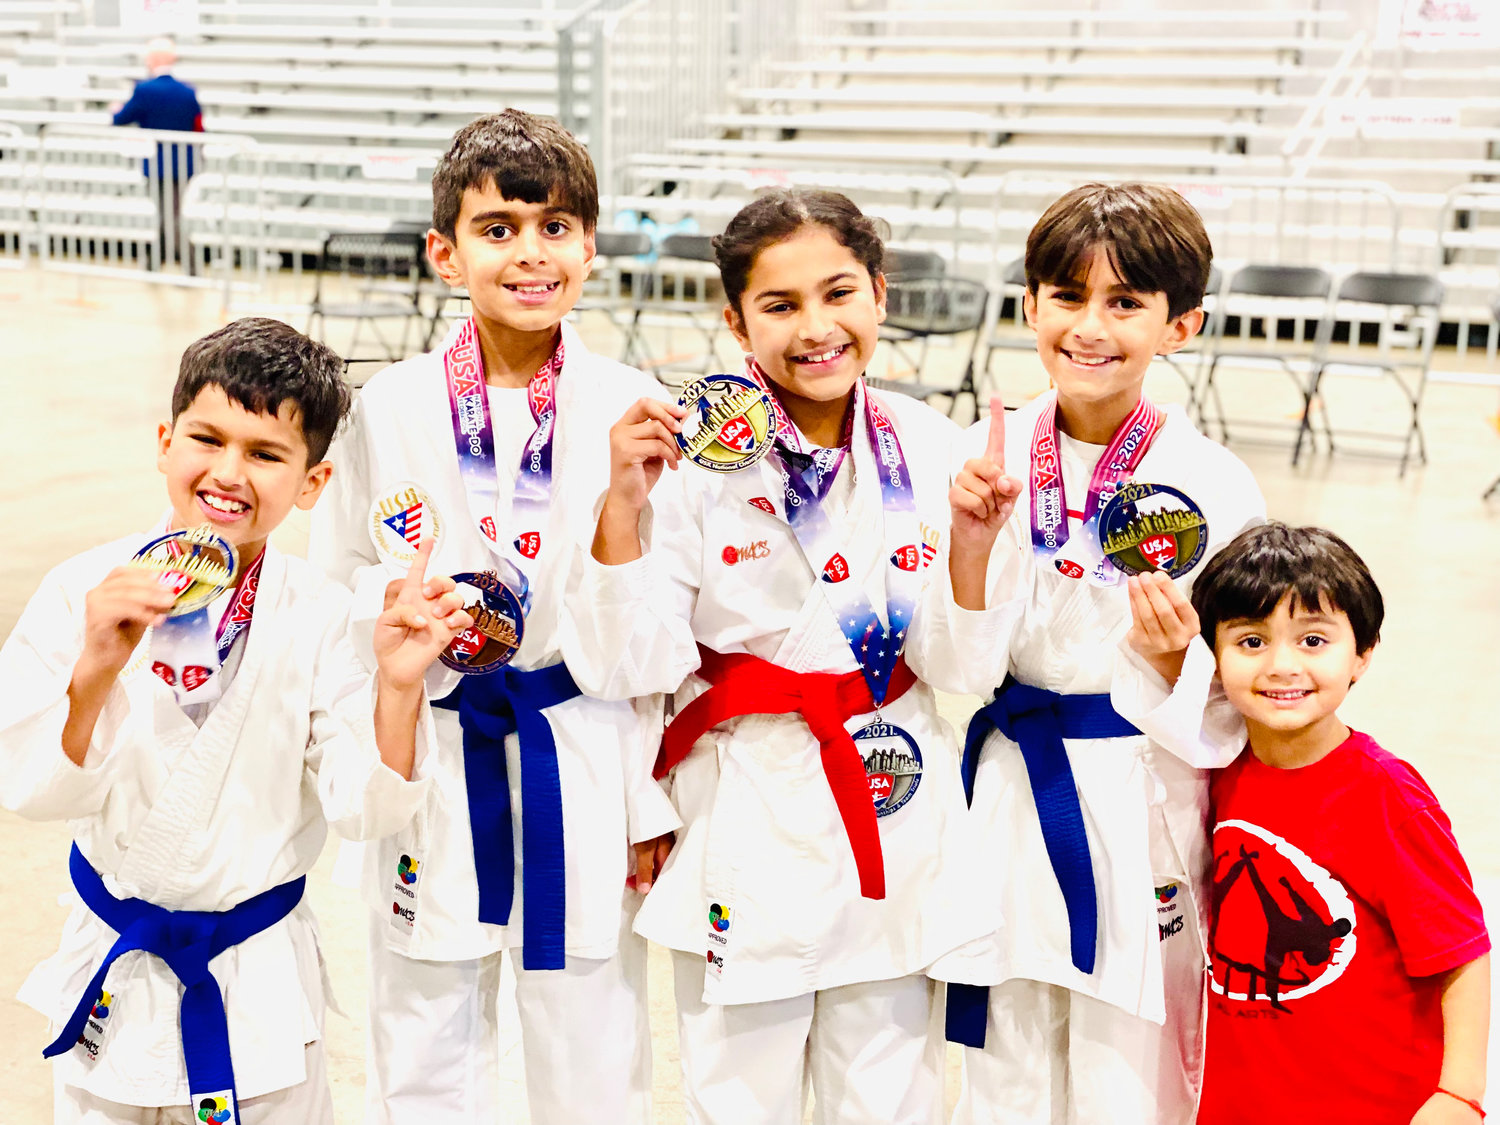 Siblings and cousins Jai, Rohan, Sonali and Deven Chopra all earned medals at this year’s national karate championships outside Chicago. Rohan and Deven’s brother Krish, far right, rooted his brothers on at the elite competition.